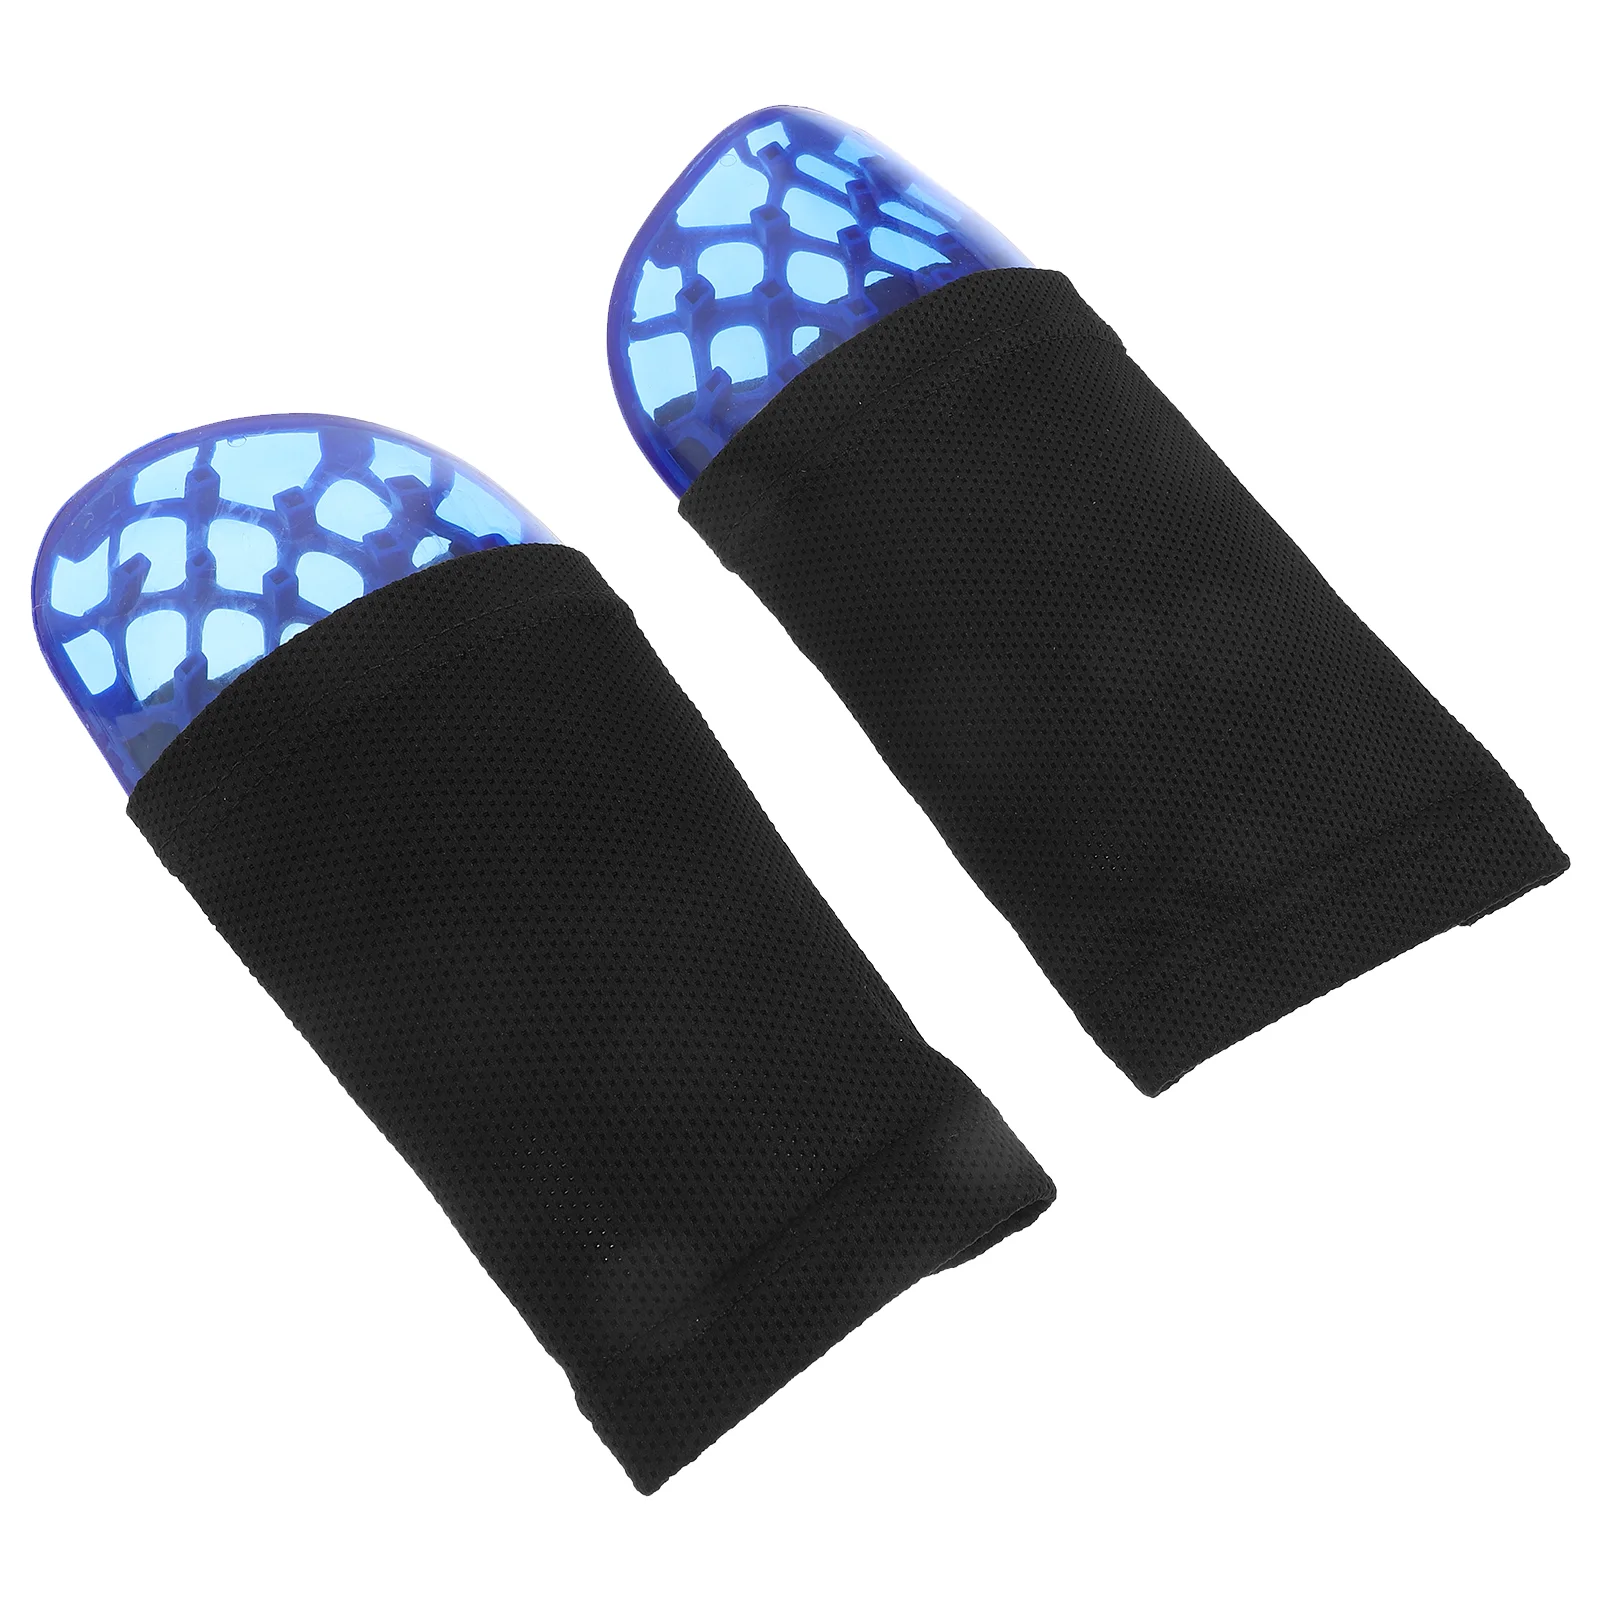 Football Shin Pads Soccer Accessories Girls Age 8 Guard Holders 9-10 Boys Guards 5-8 Rubber Kids 7-8 Shinguards